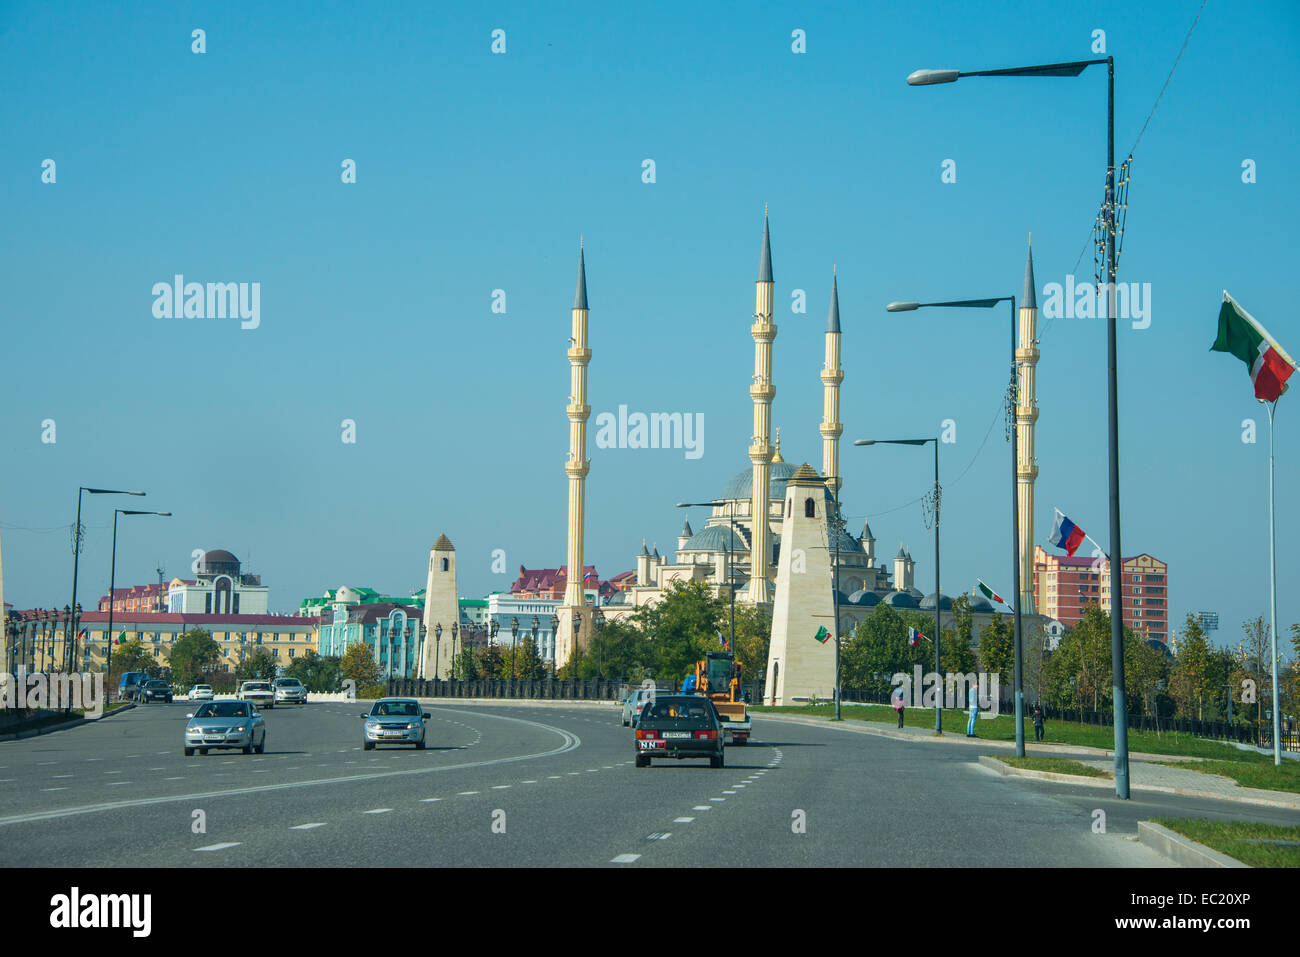 Highway and Akhmad Kadyrov Mosque, Chechnya, Caucasus, Russia Stock Photo